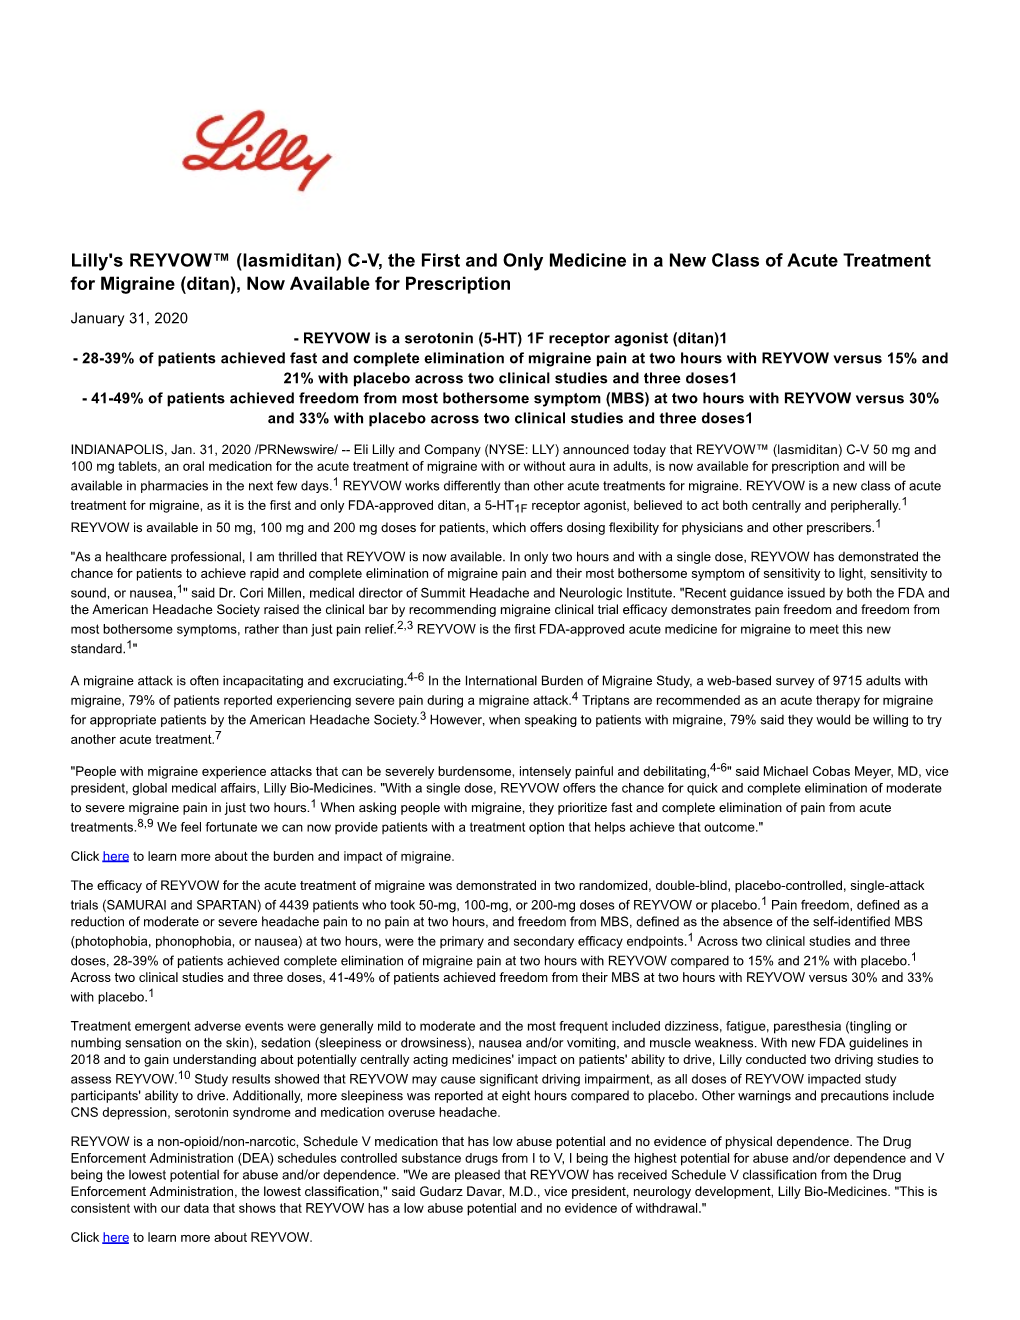 Lilly's REYVOW™ (Lasmiditan) C-V, the First and Only Medicine in a New Class of Acute Treatment for Migraine (Ditan), Now Available for Prescription